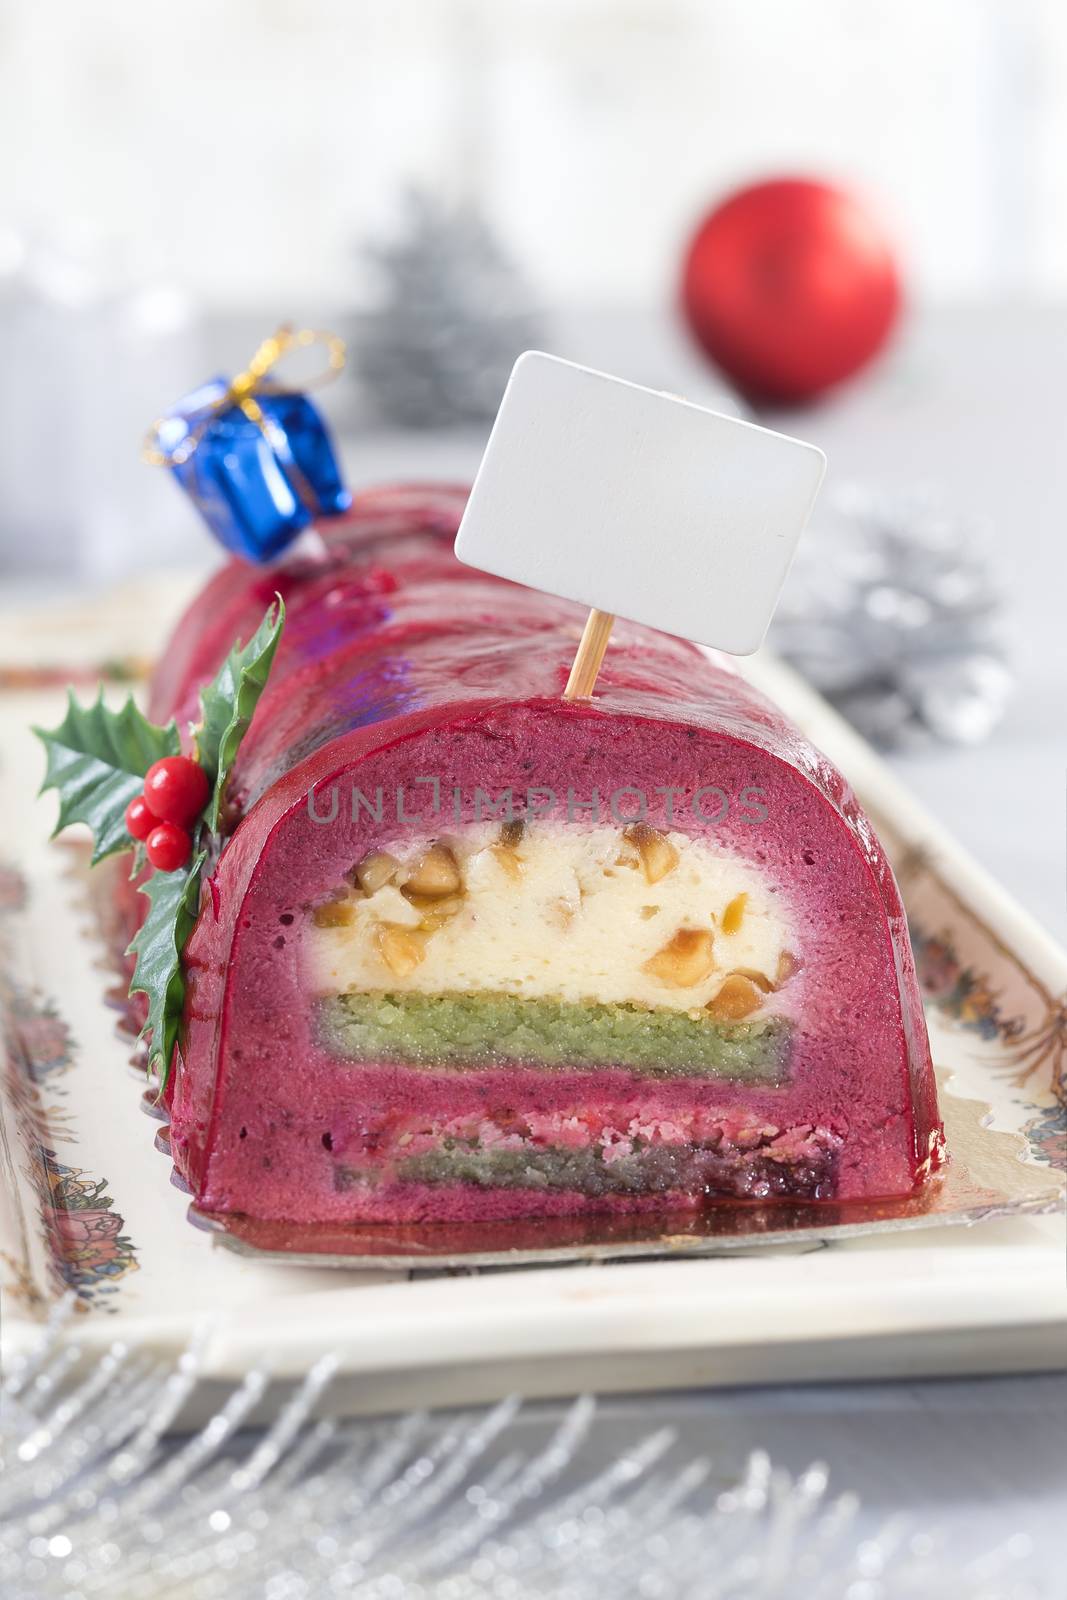 Chocolate swiss roll cake with Red berries by JPC-PROD